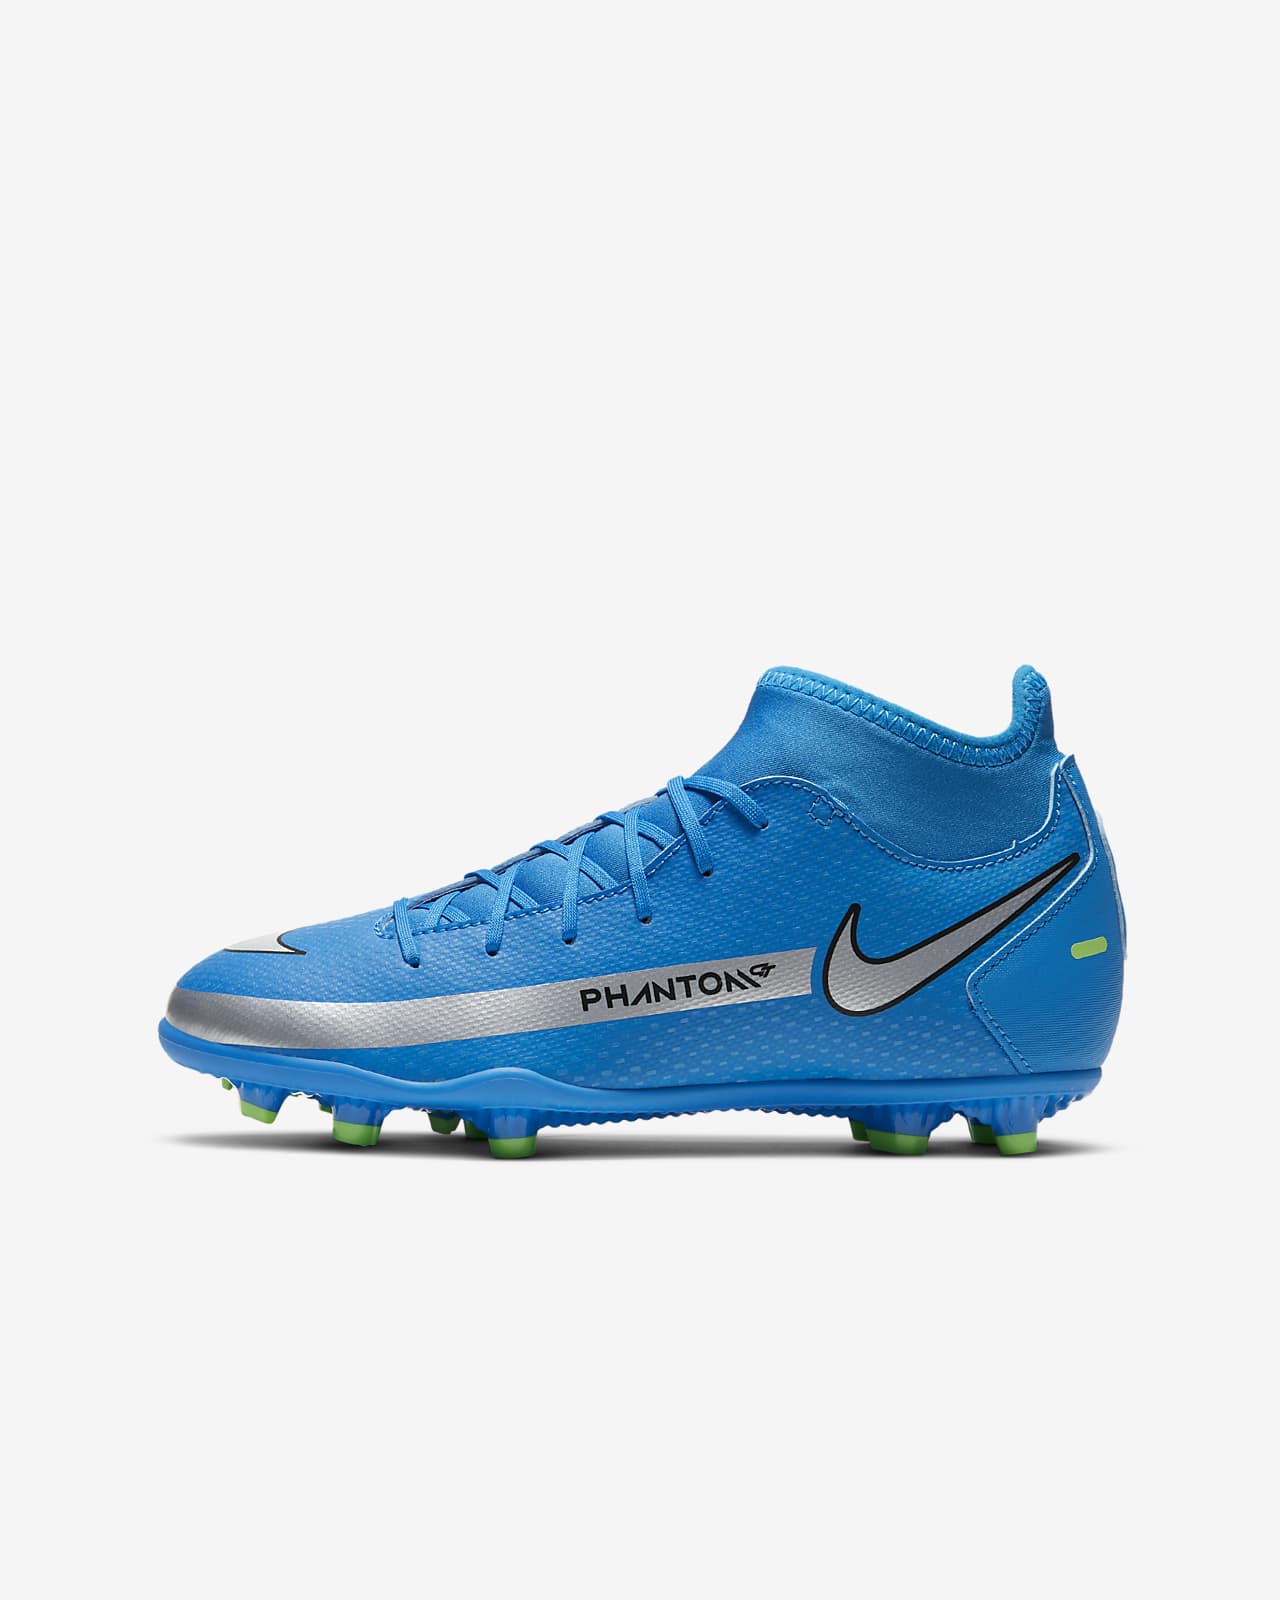 teal youth soccer cleats